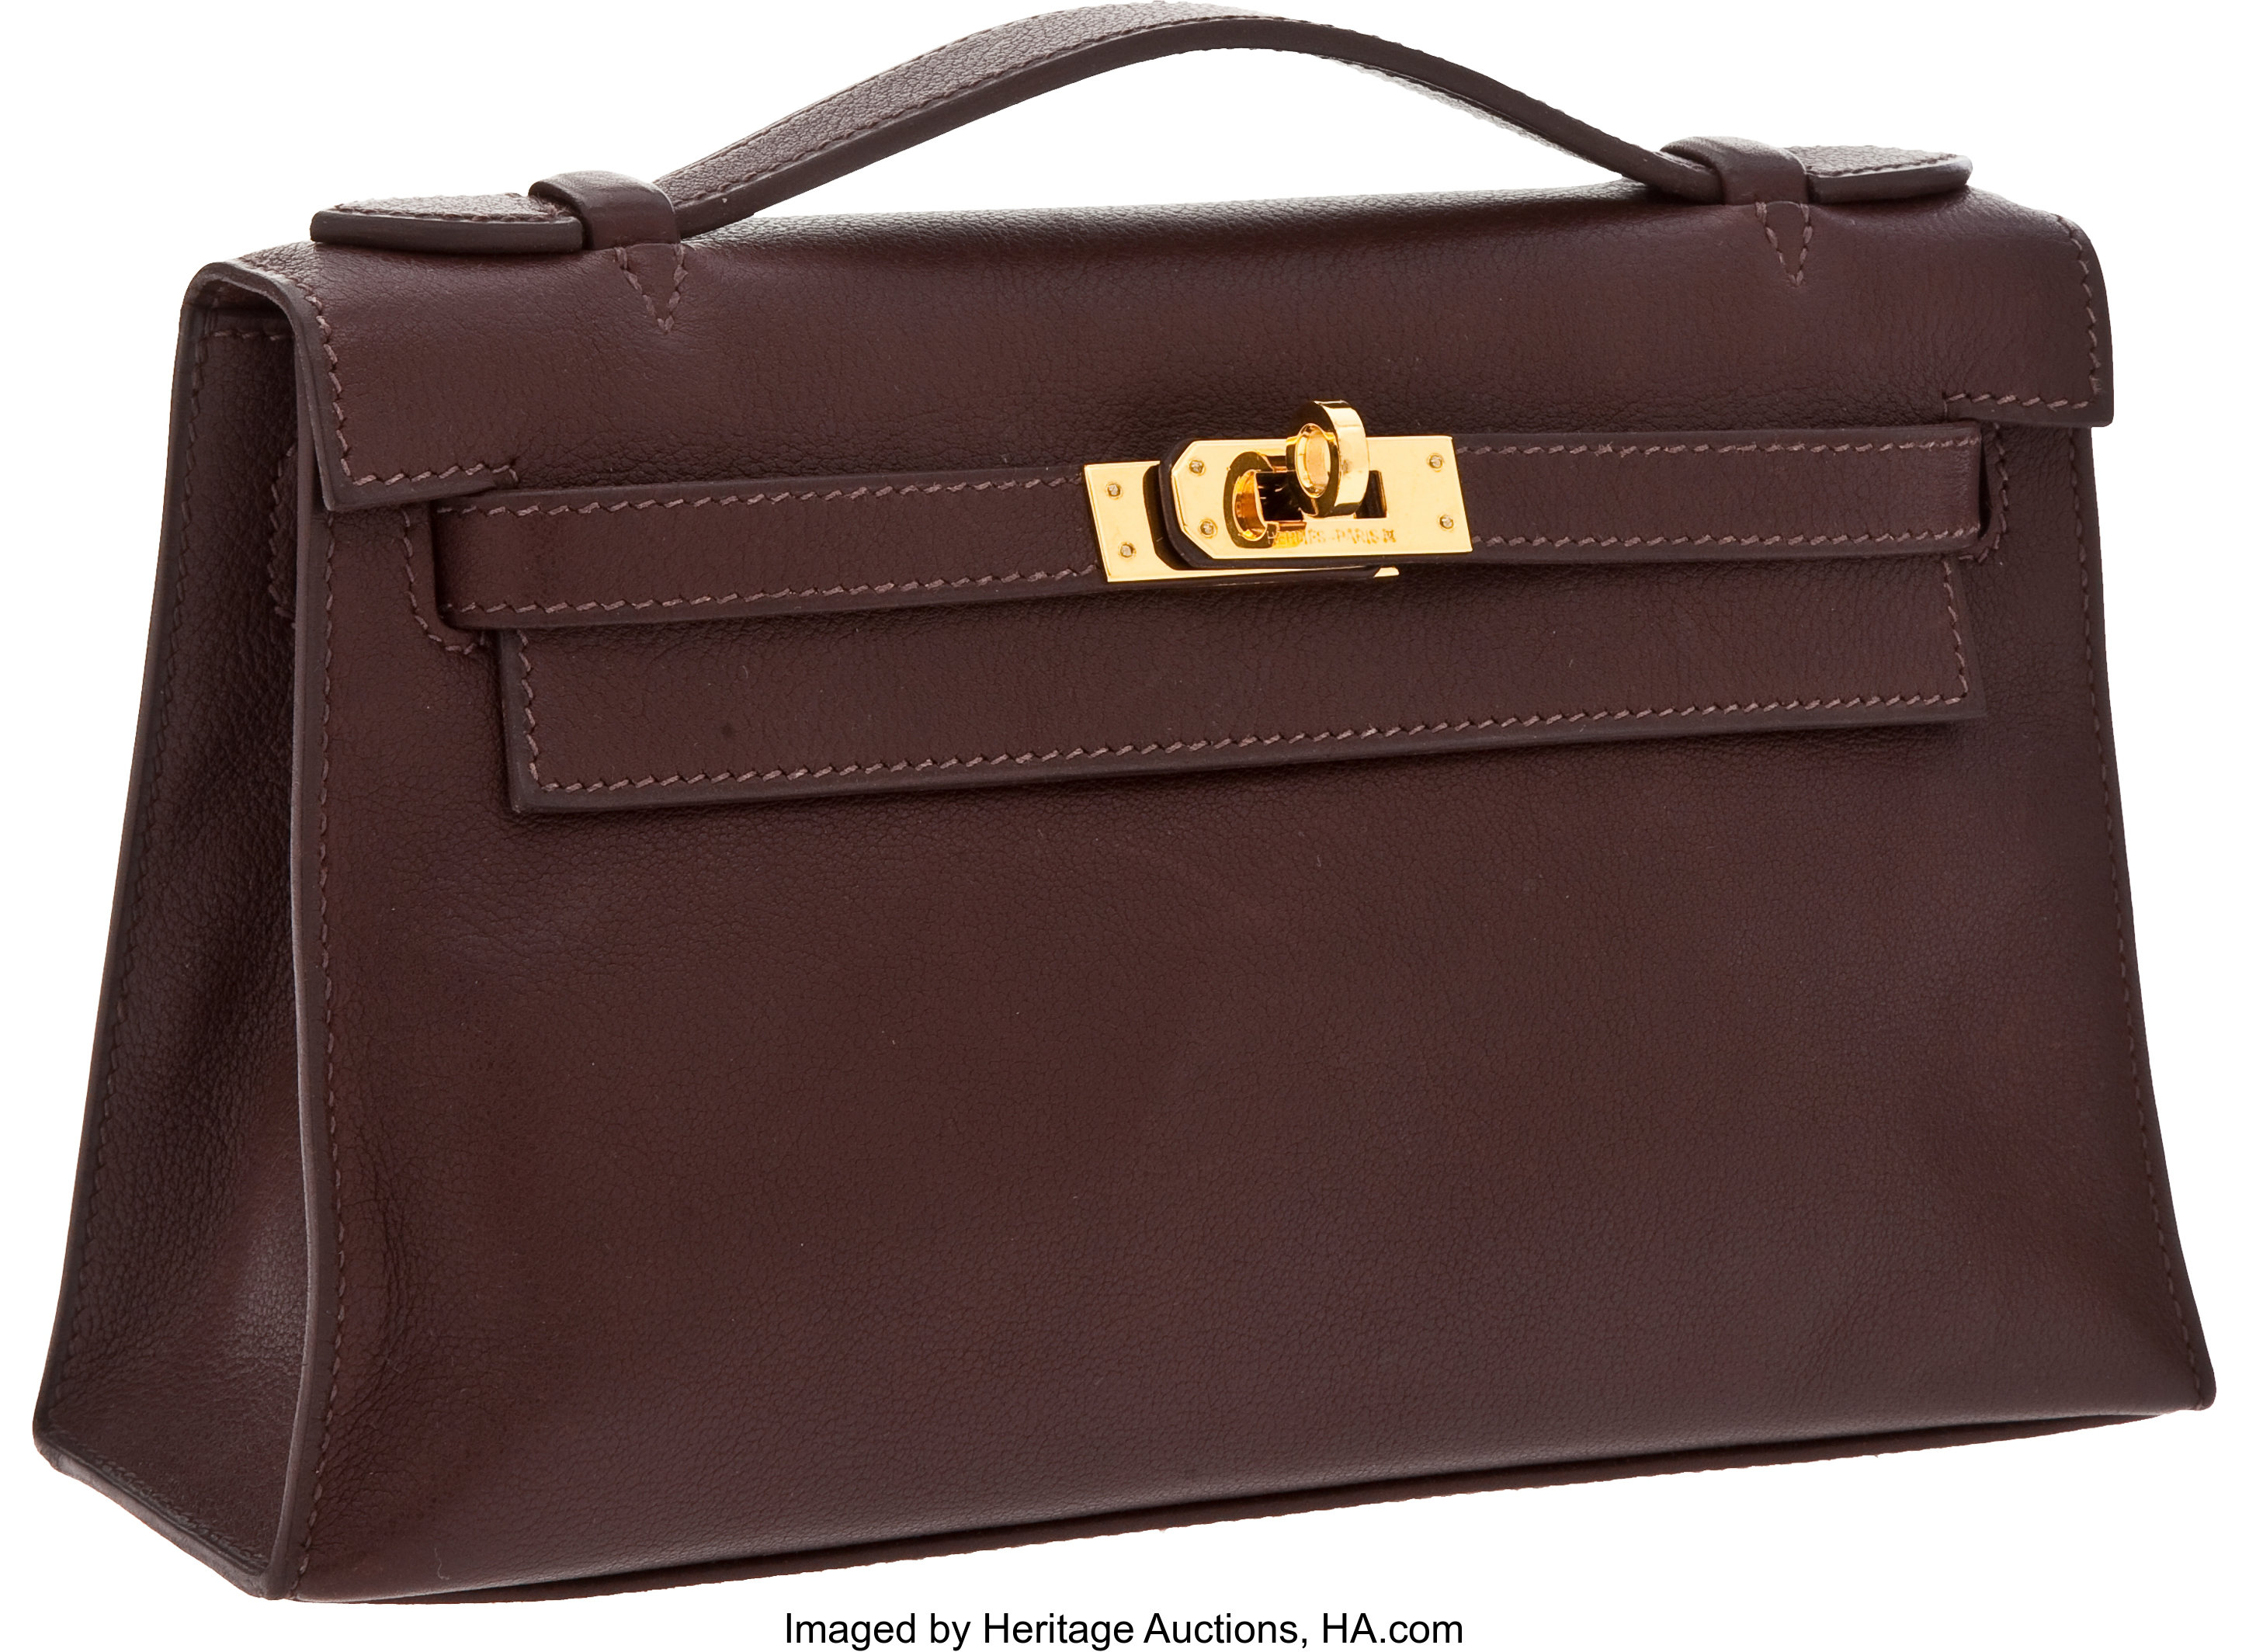 Hermes Chocolate Swift Leather Kelly Pochette Bag with Gold